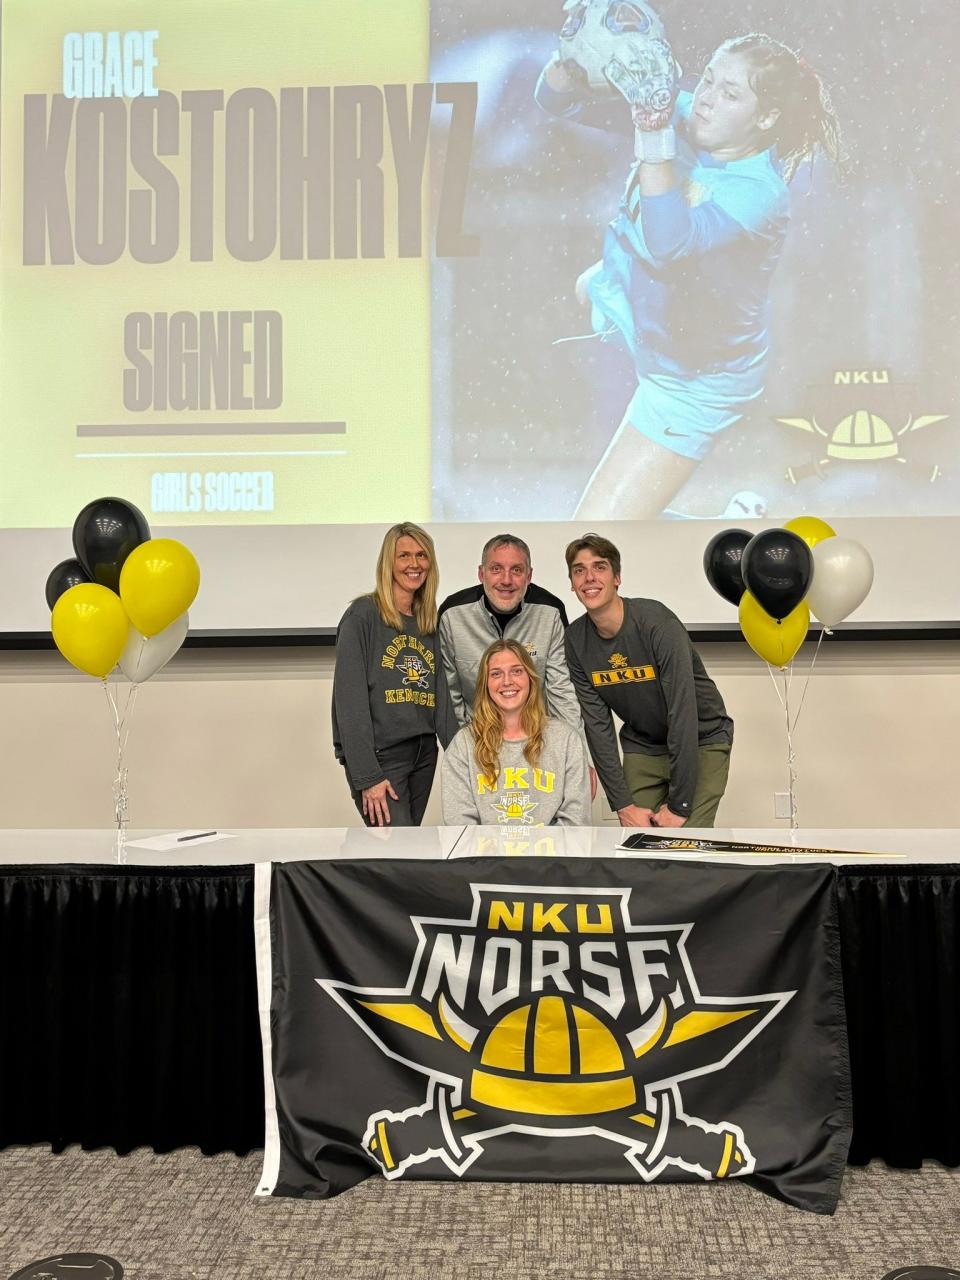 Wooster senior and standout goalkeeper, the heartbeat and MVP of her team, Grace Kostohryz relaxes after signing her letter of intent to Northern Kentucky University with her family.